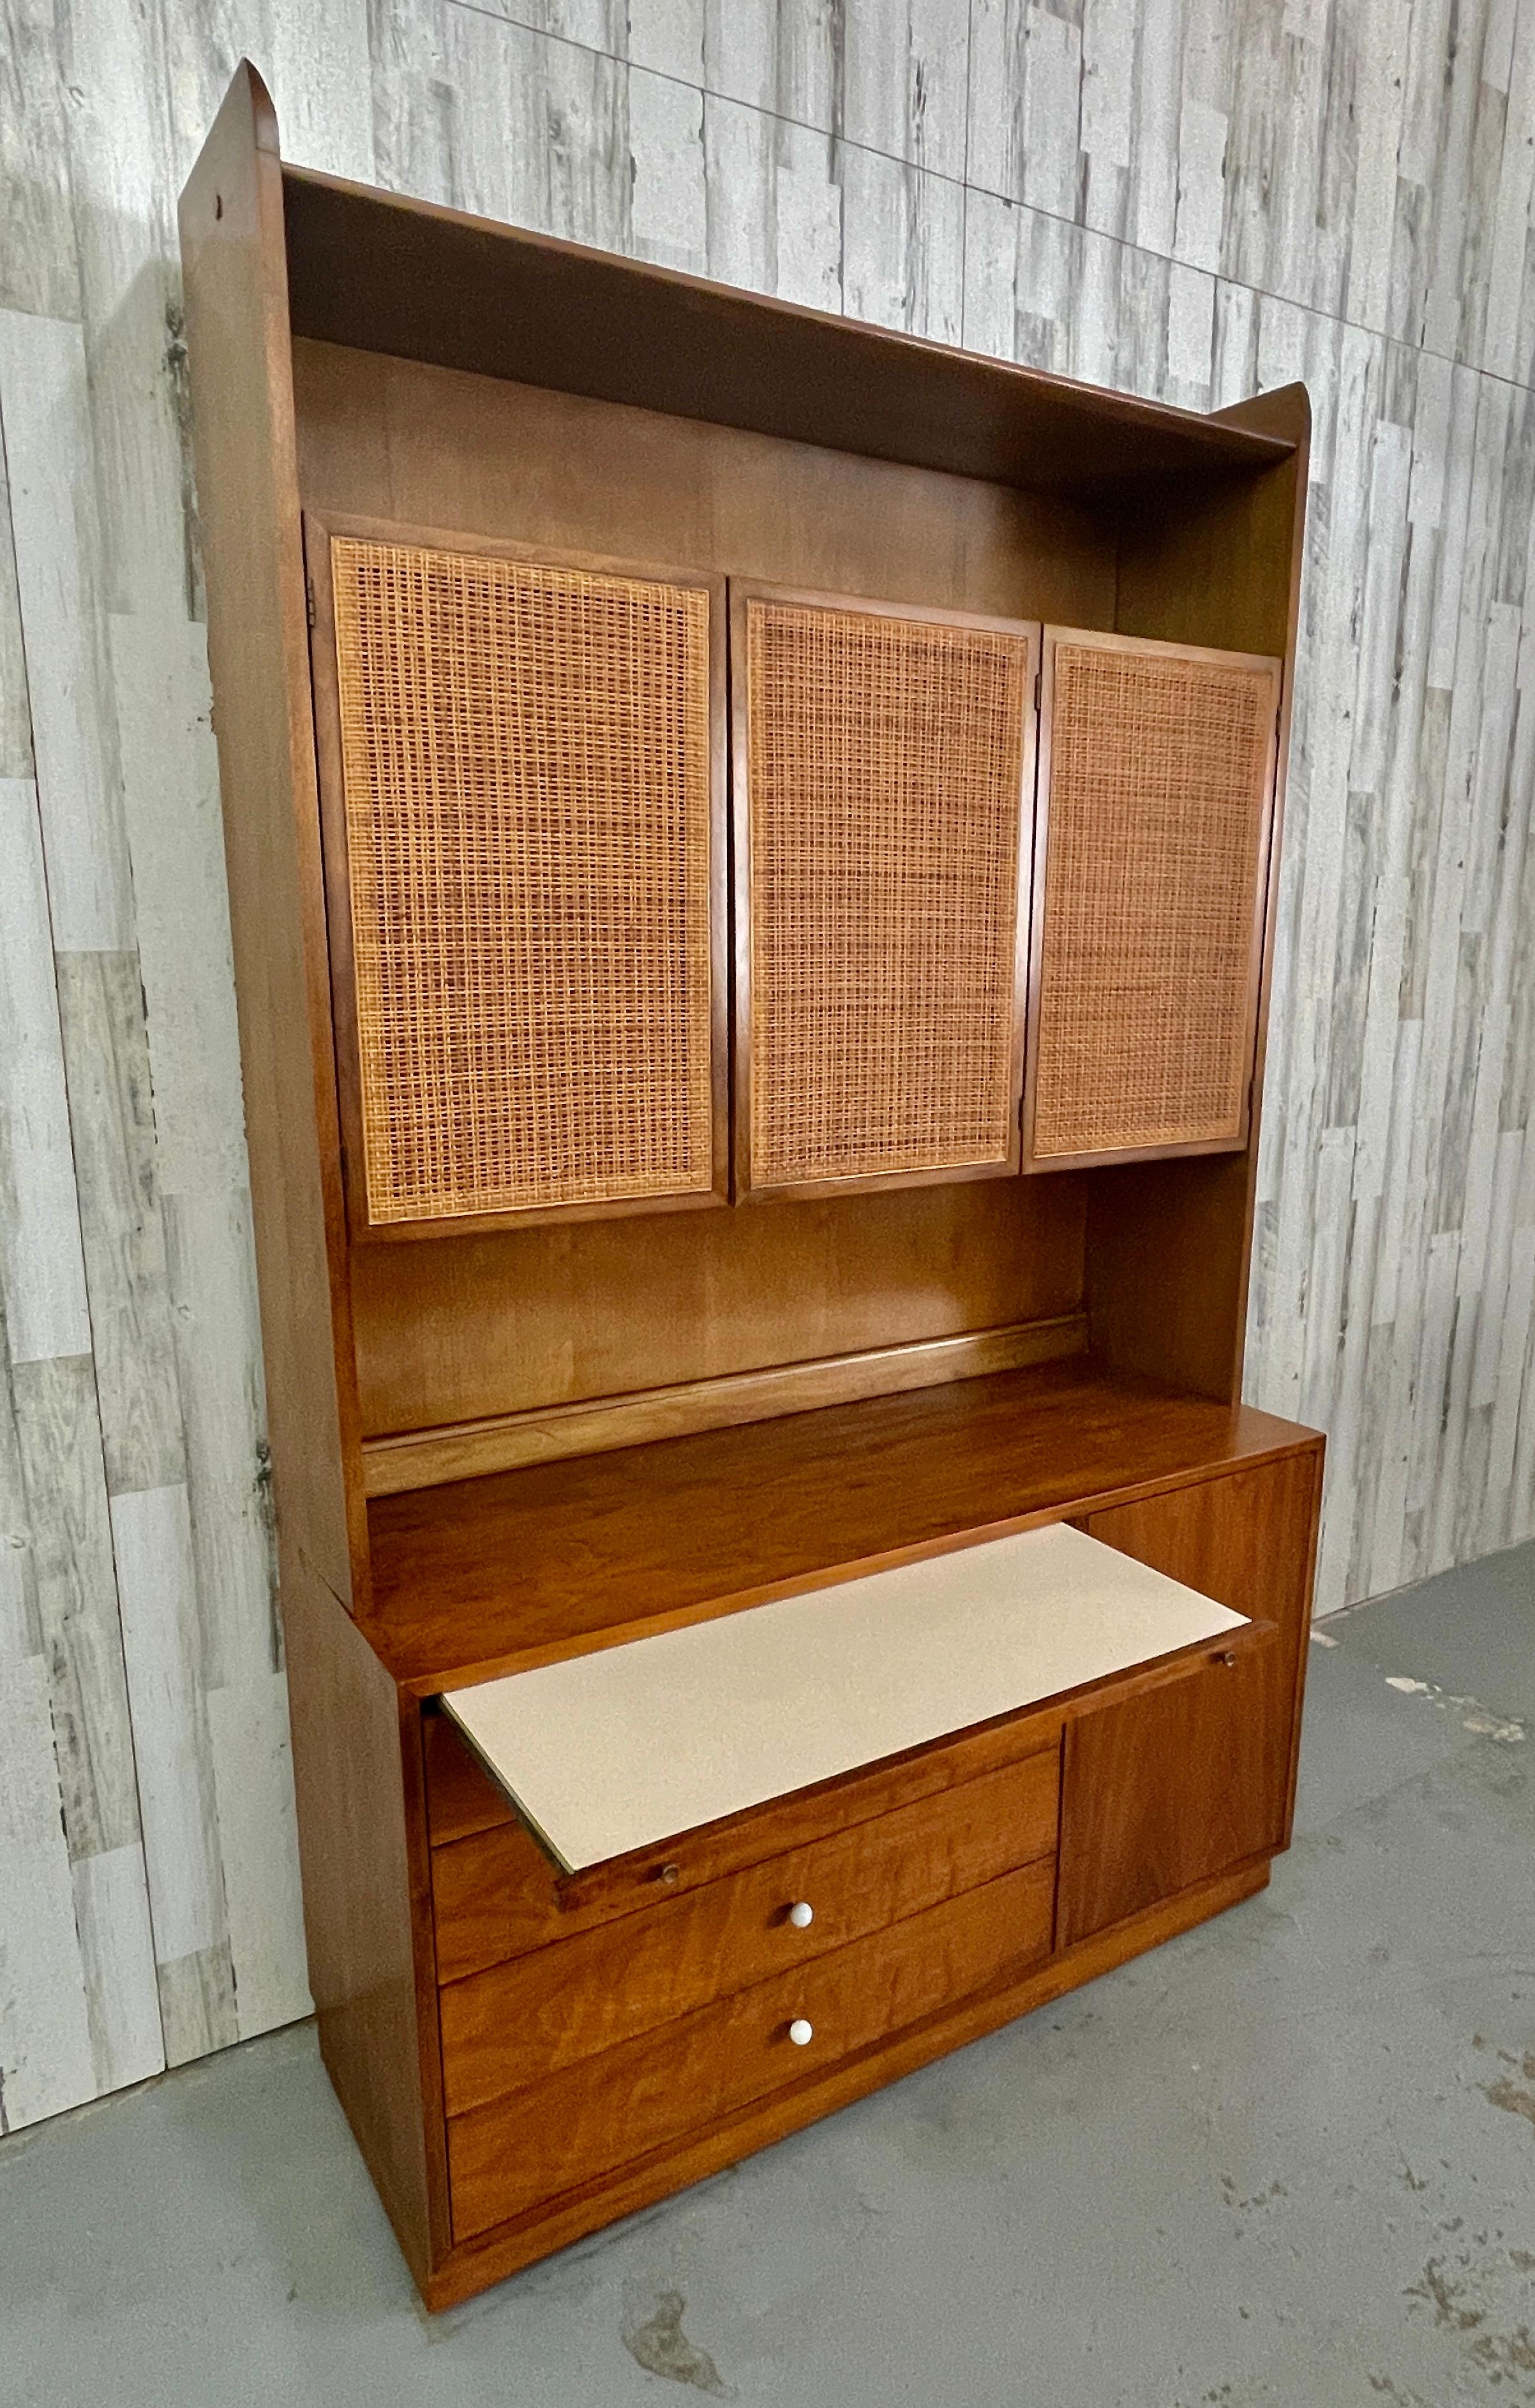 Drexel Declaration Walnut and Cane Cabinet In Good Condition For Sale In Denton, TX